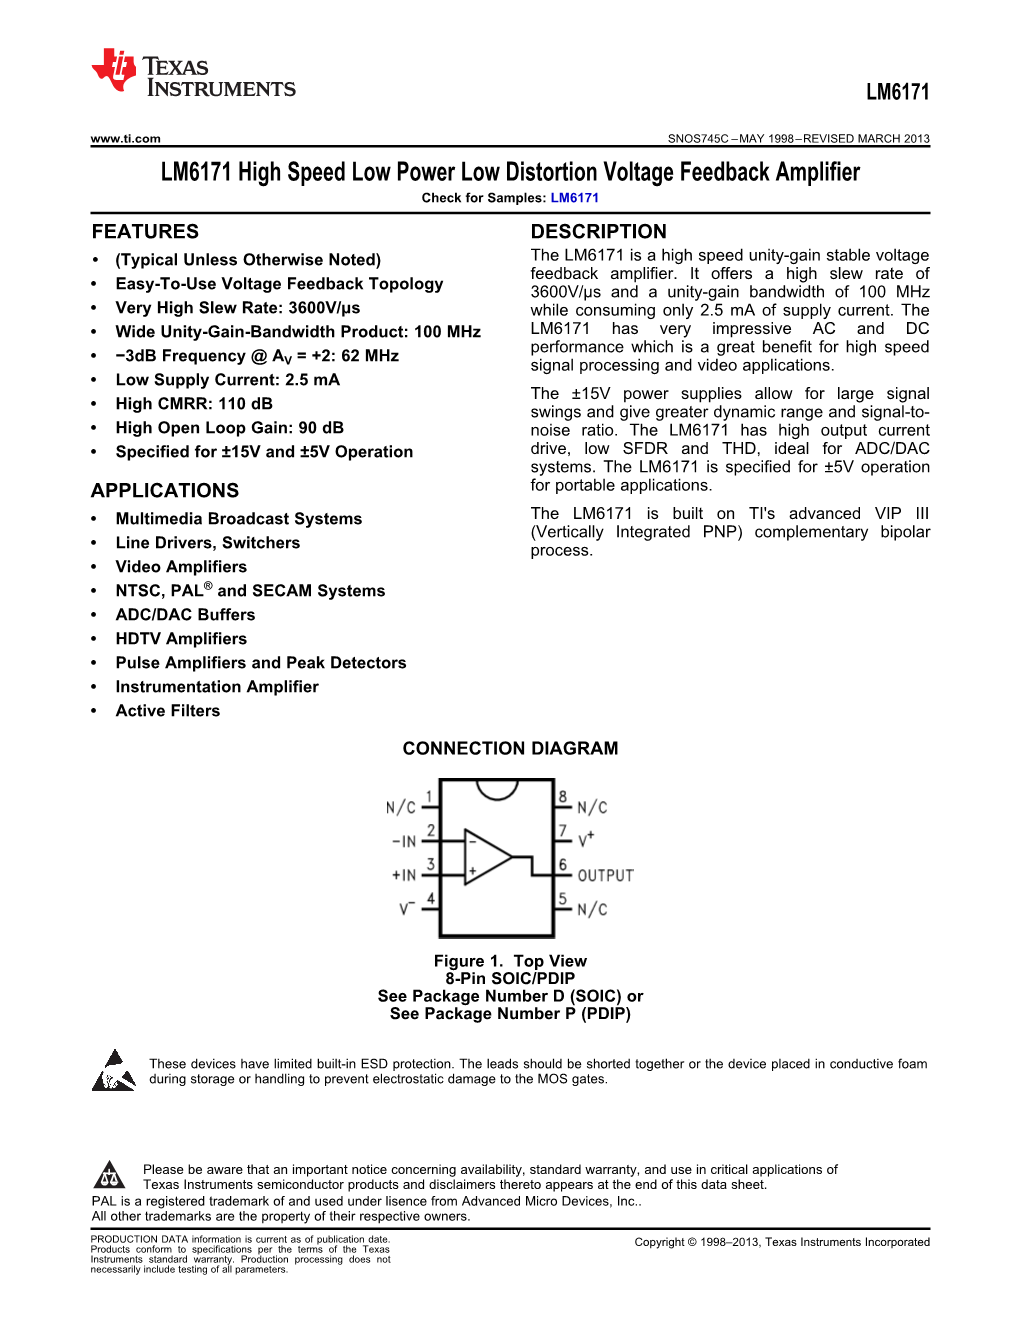 LM6171 High Speed Low Power Low Distortion Voltage Feedback Amplifier Check for Samples: LM6171